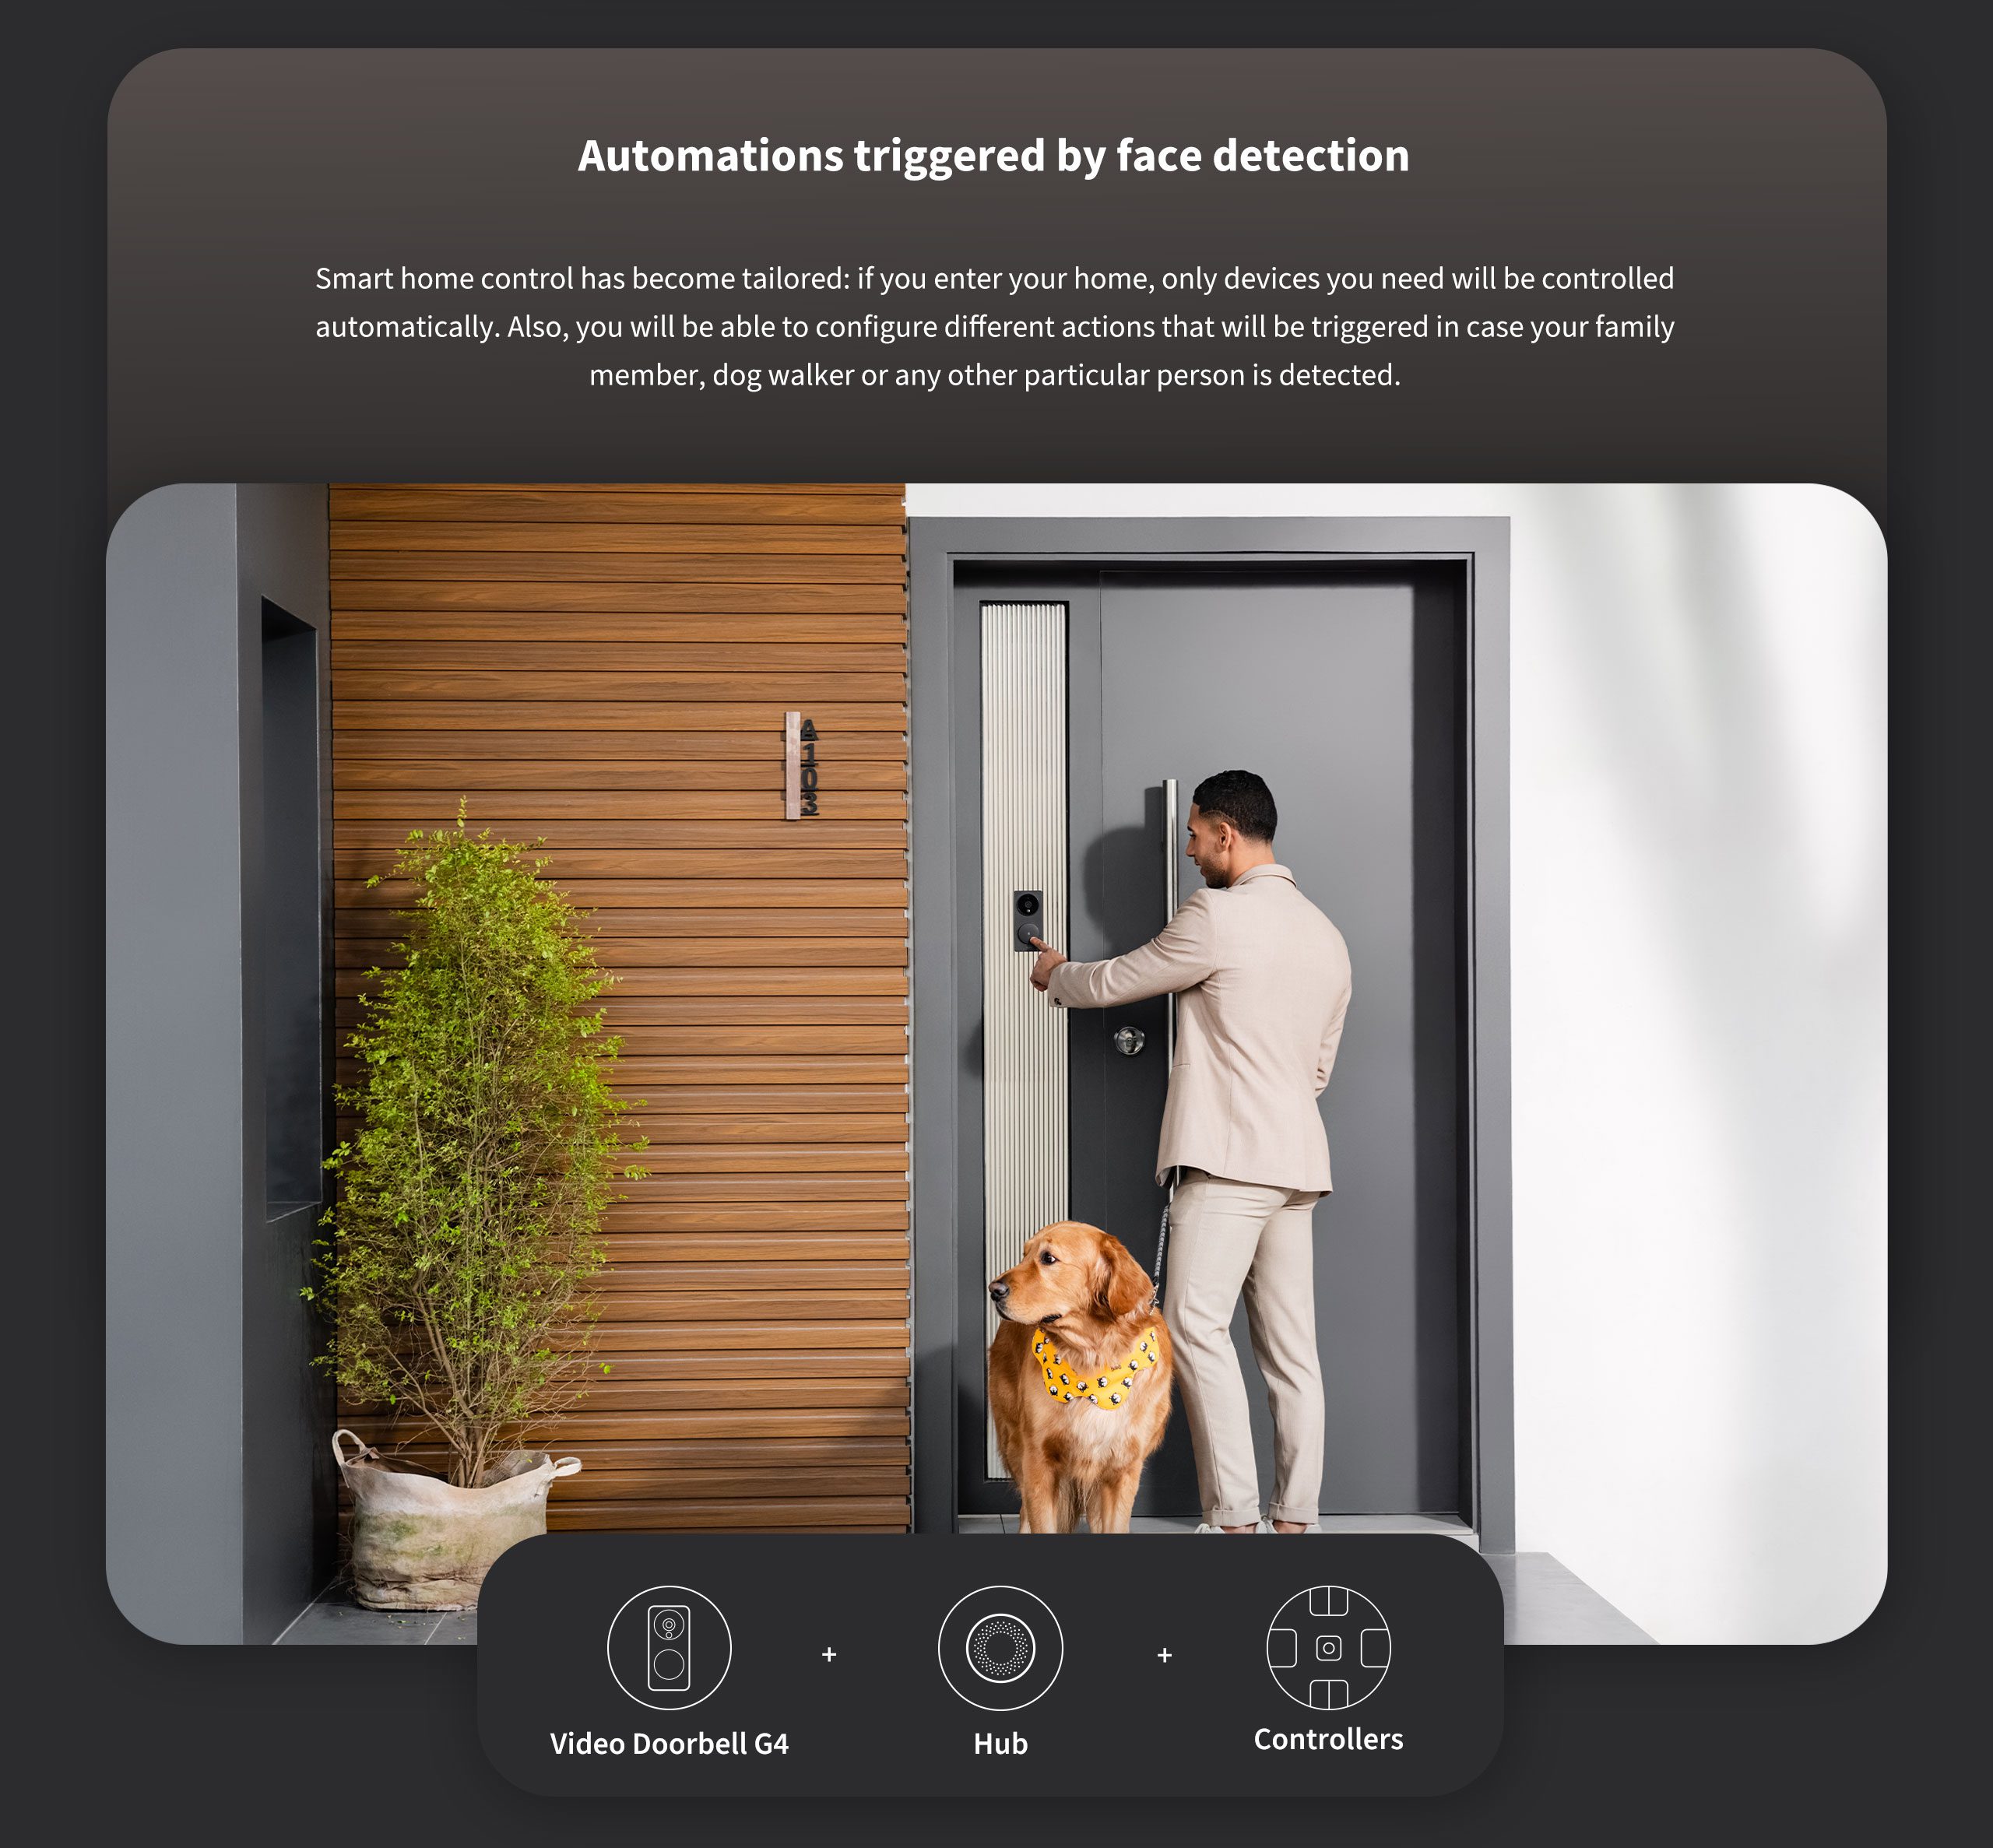 G4 Video Door Bell pc 9 Aqara Video Doorbell G4 (Chime Included), 1080p FHD HomeKit Secure Video Doorbell Camera, Local Face Recognition and Automations